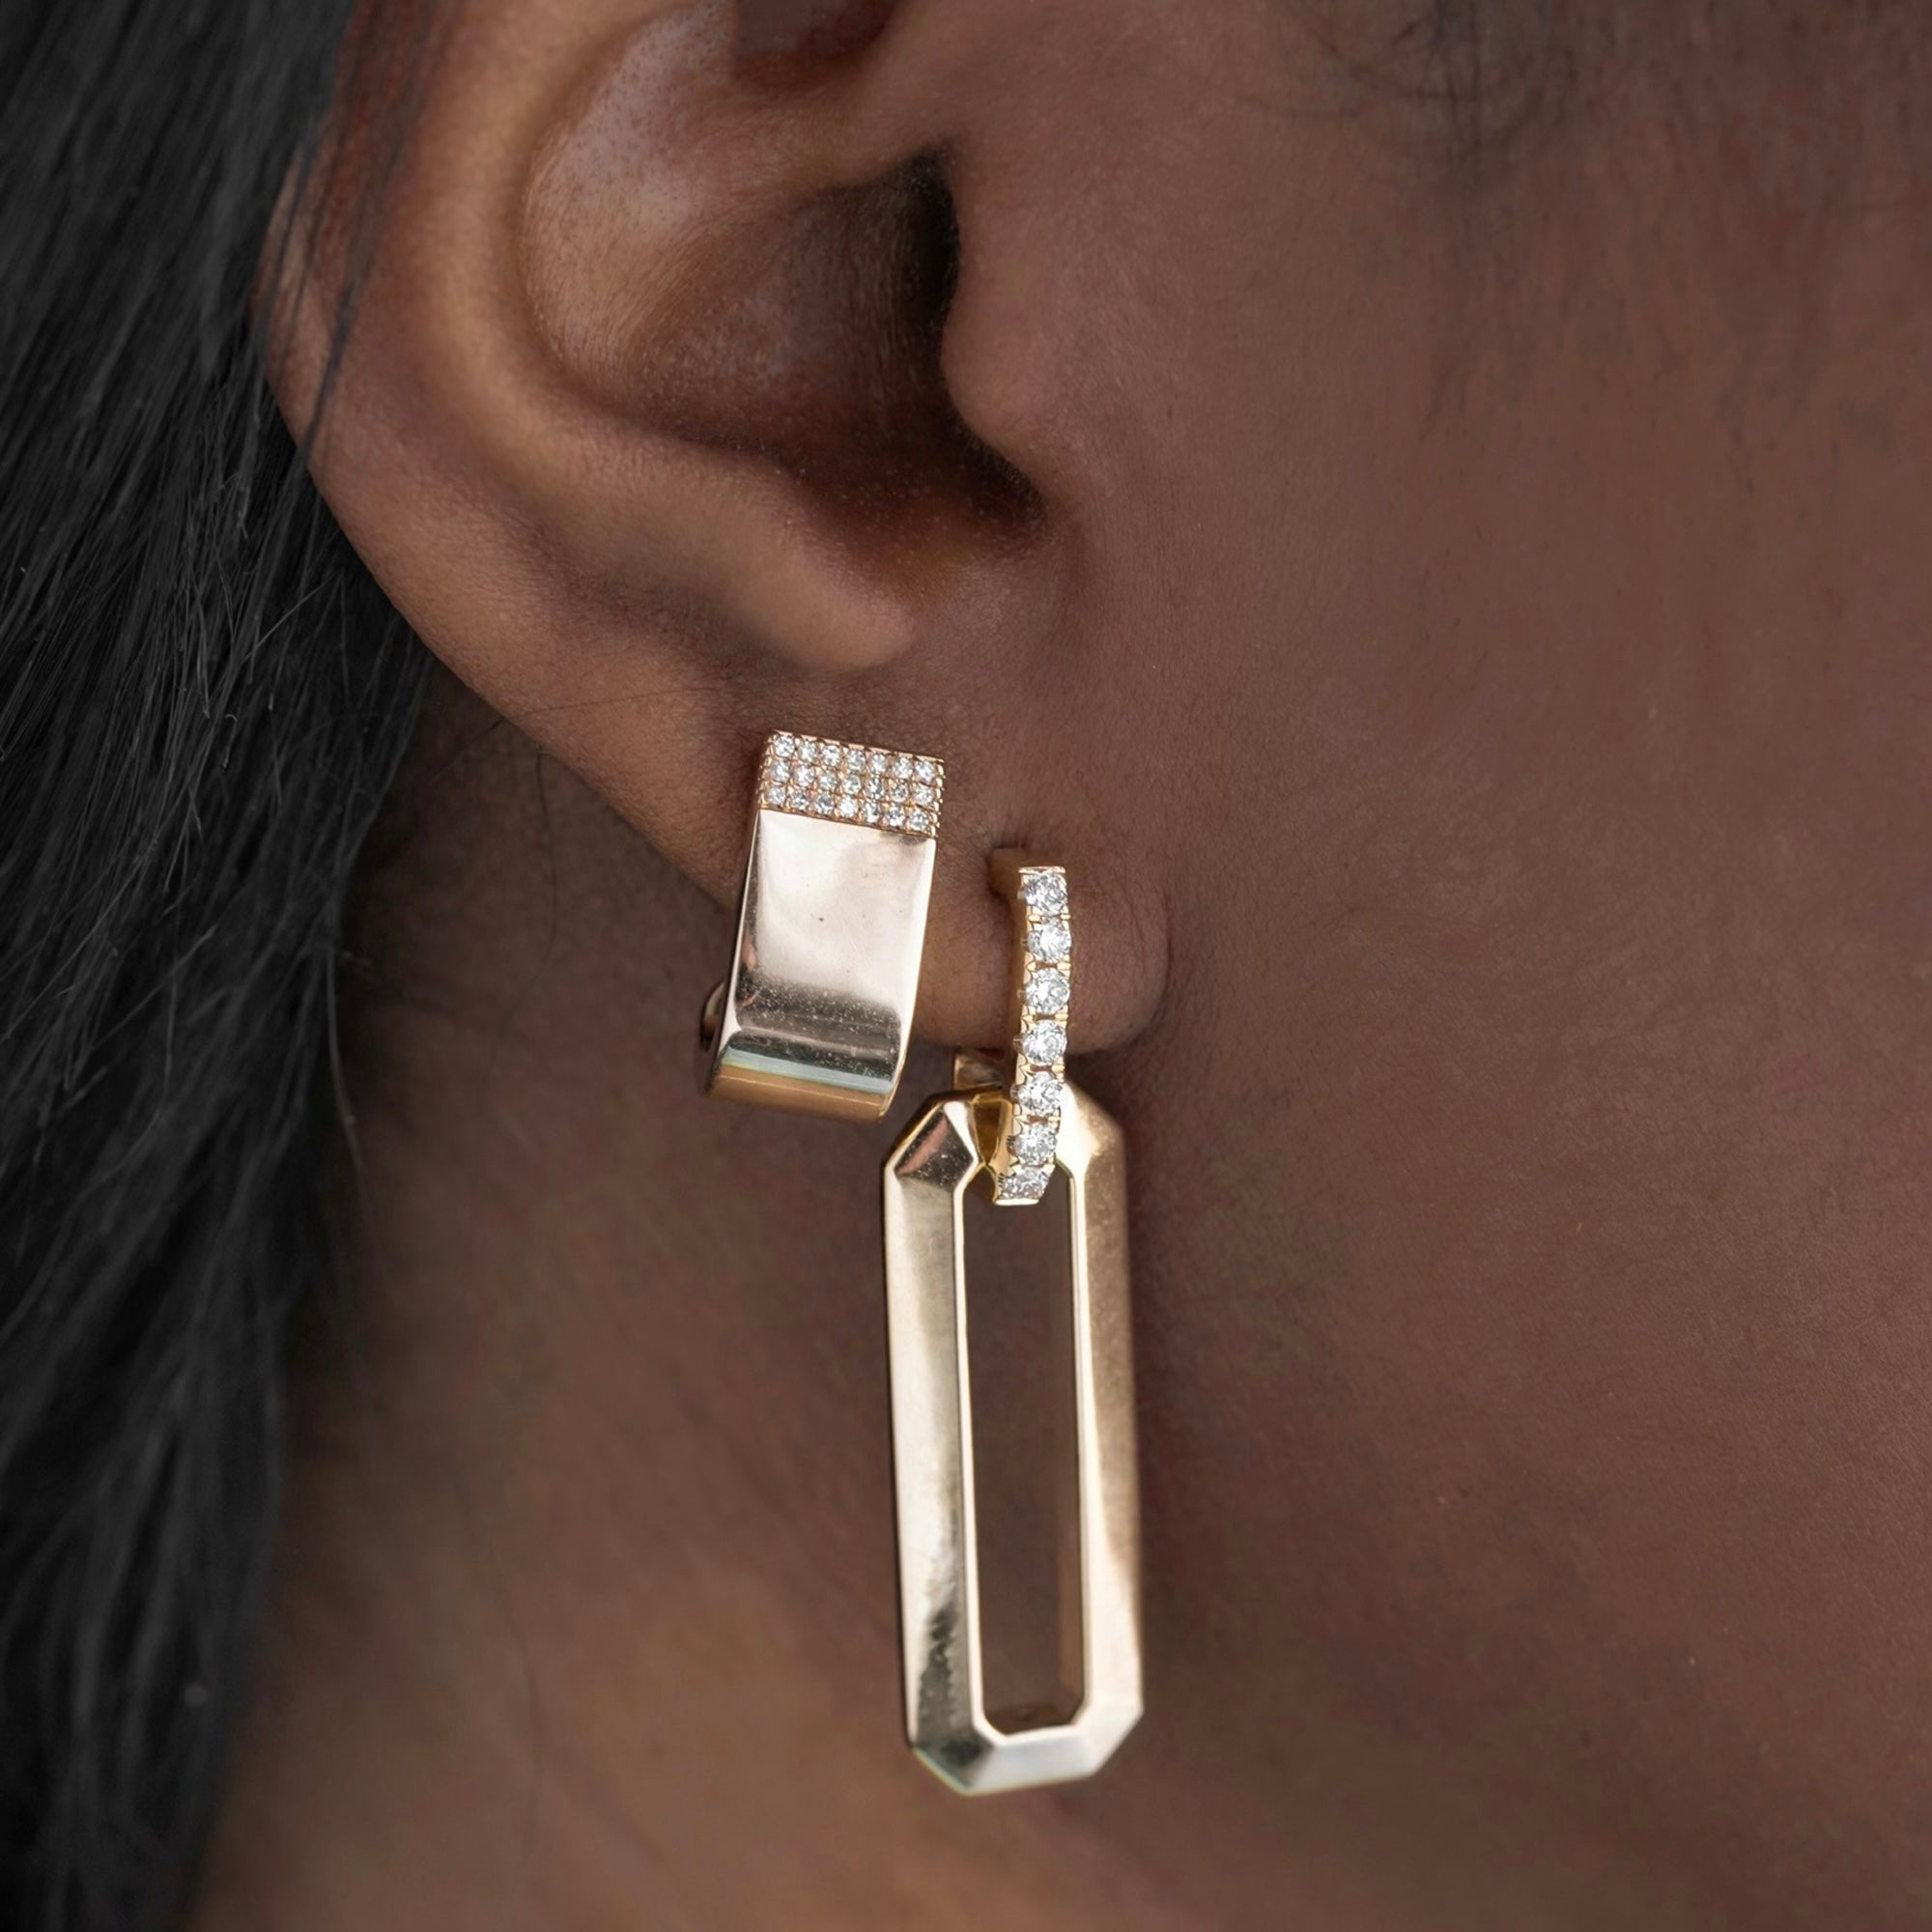 Diamond Stick And Gold Squared-Off Bubble Link Earrings